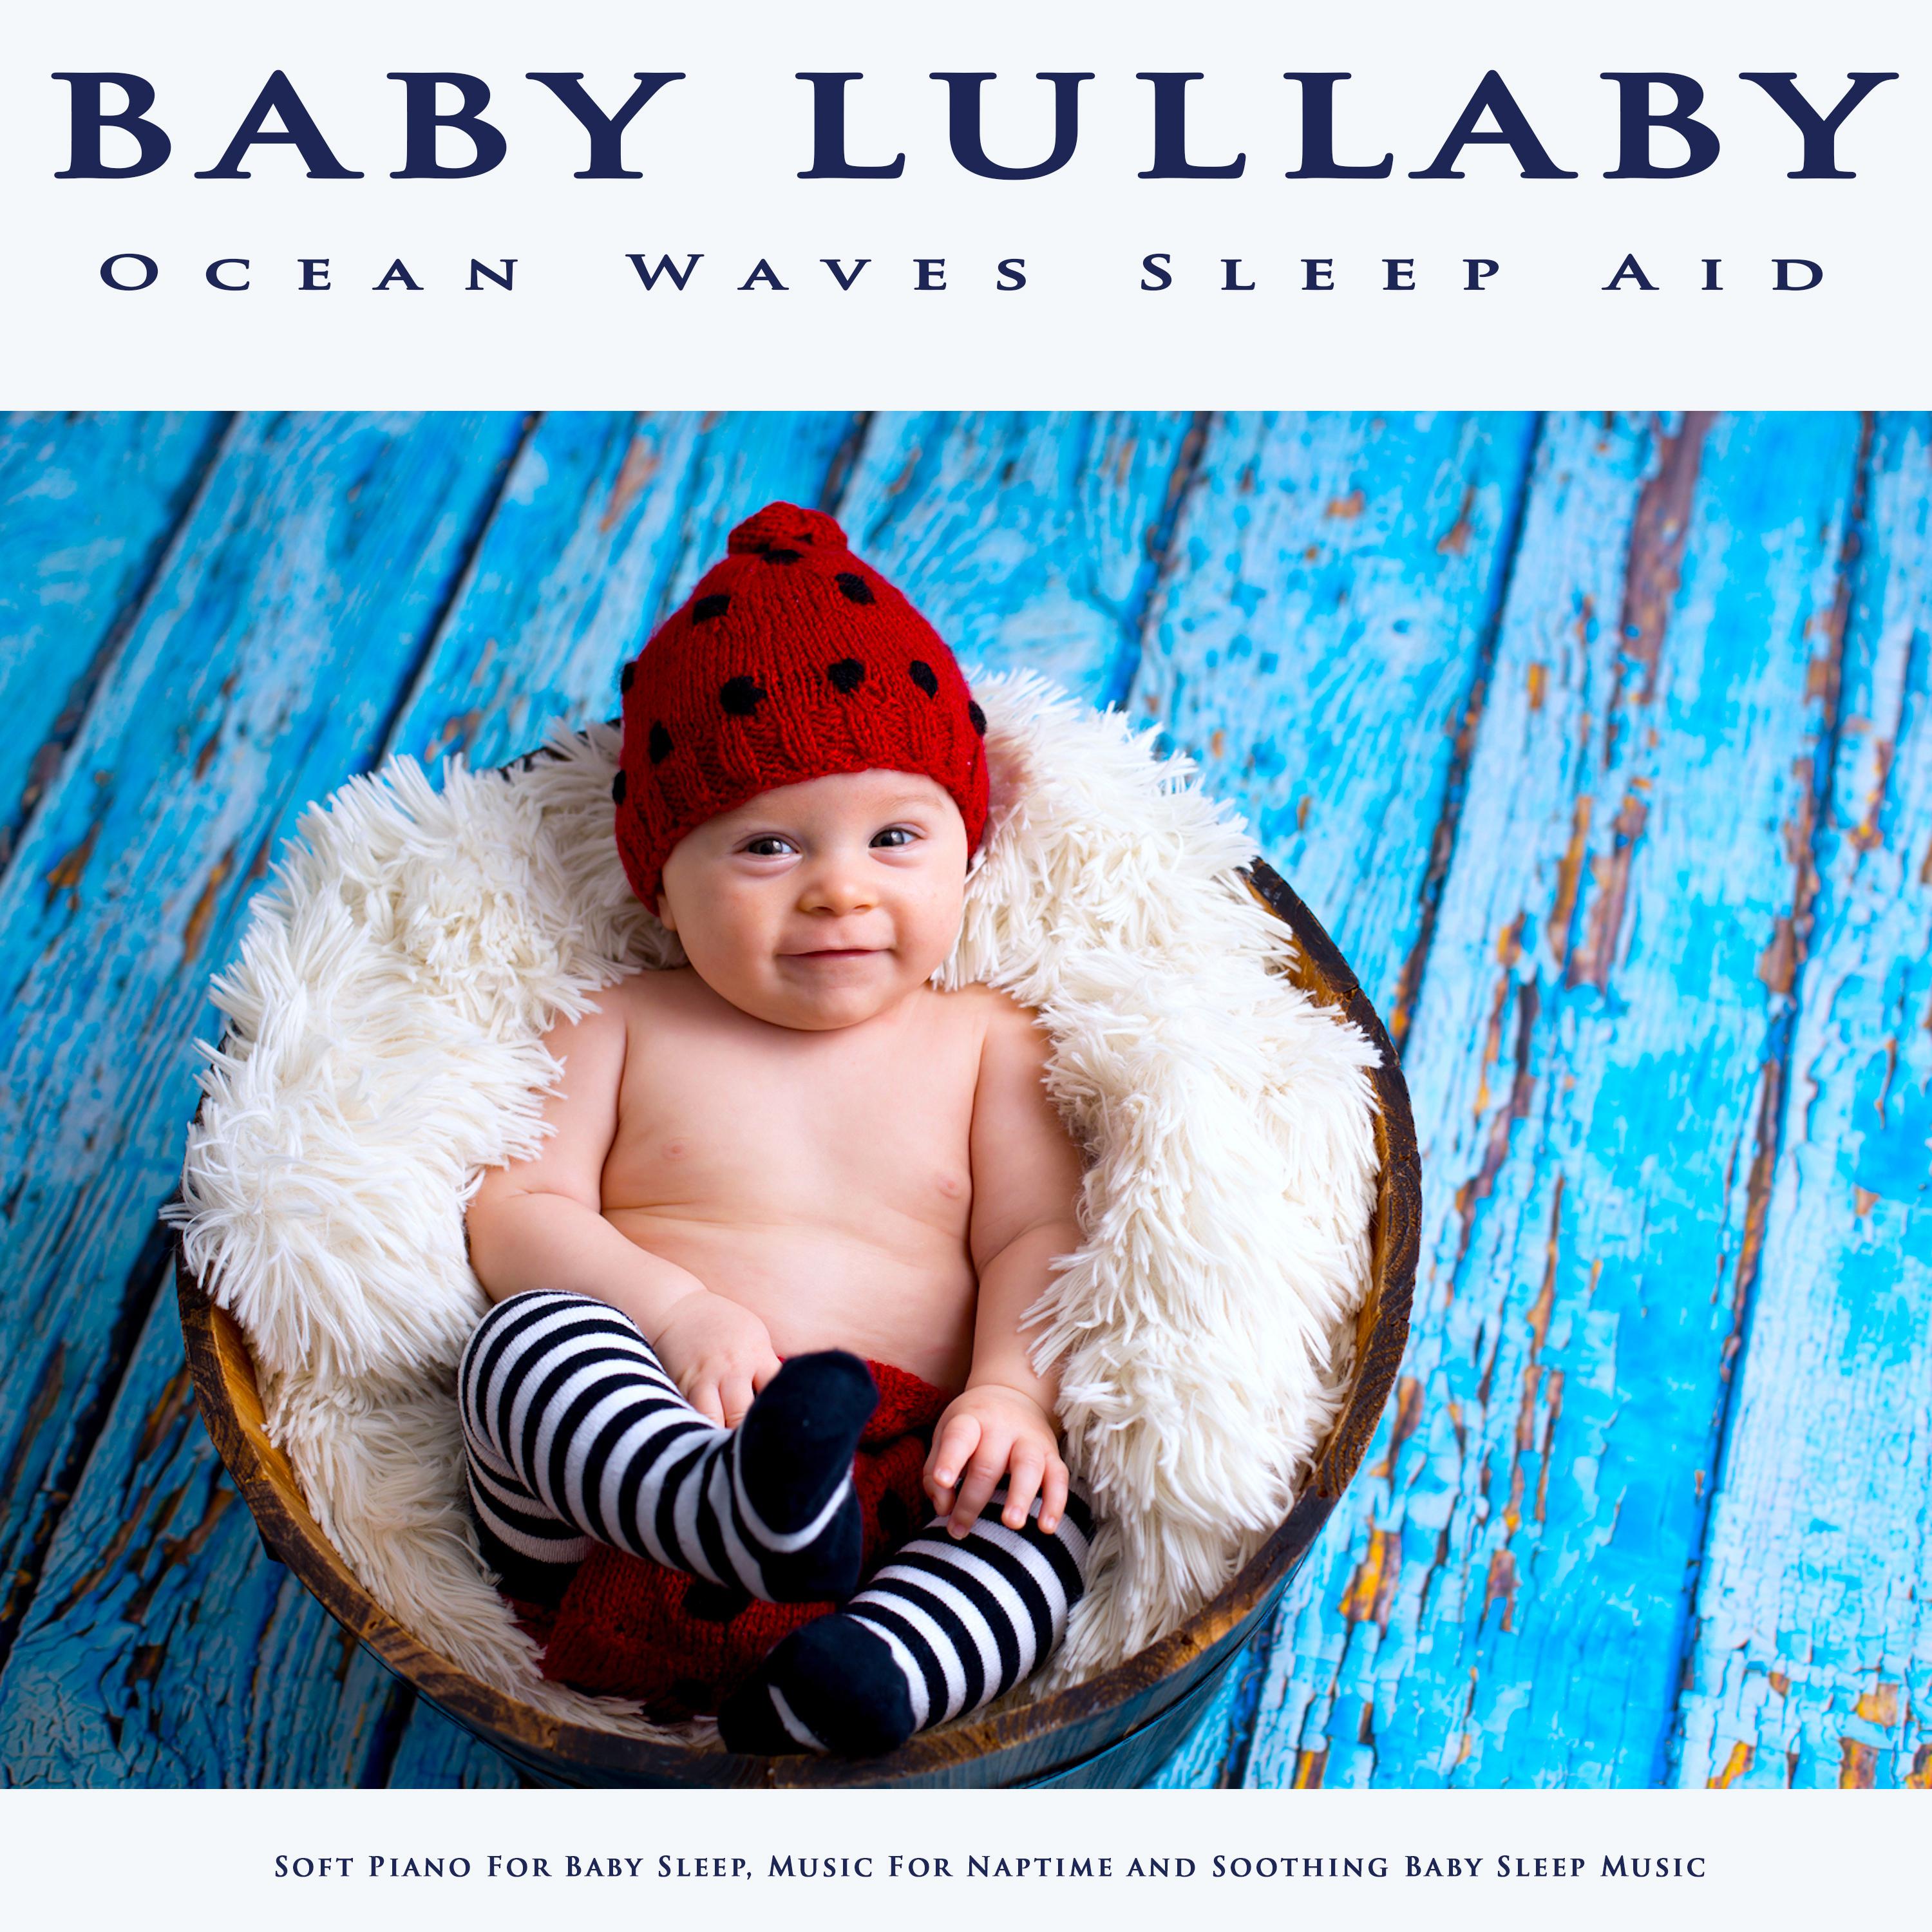 Baby Lullaby: Ocean Waves Sleep Aid, Soft Piano For Baby Sleep, Music For Naptime and Soothing Baby Sleep Music